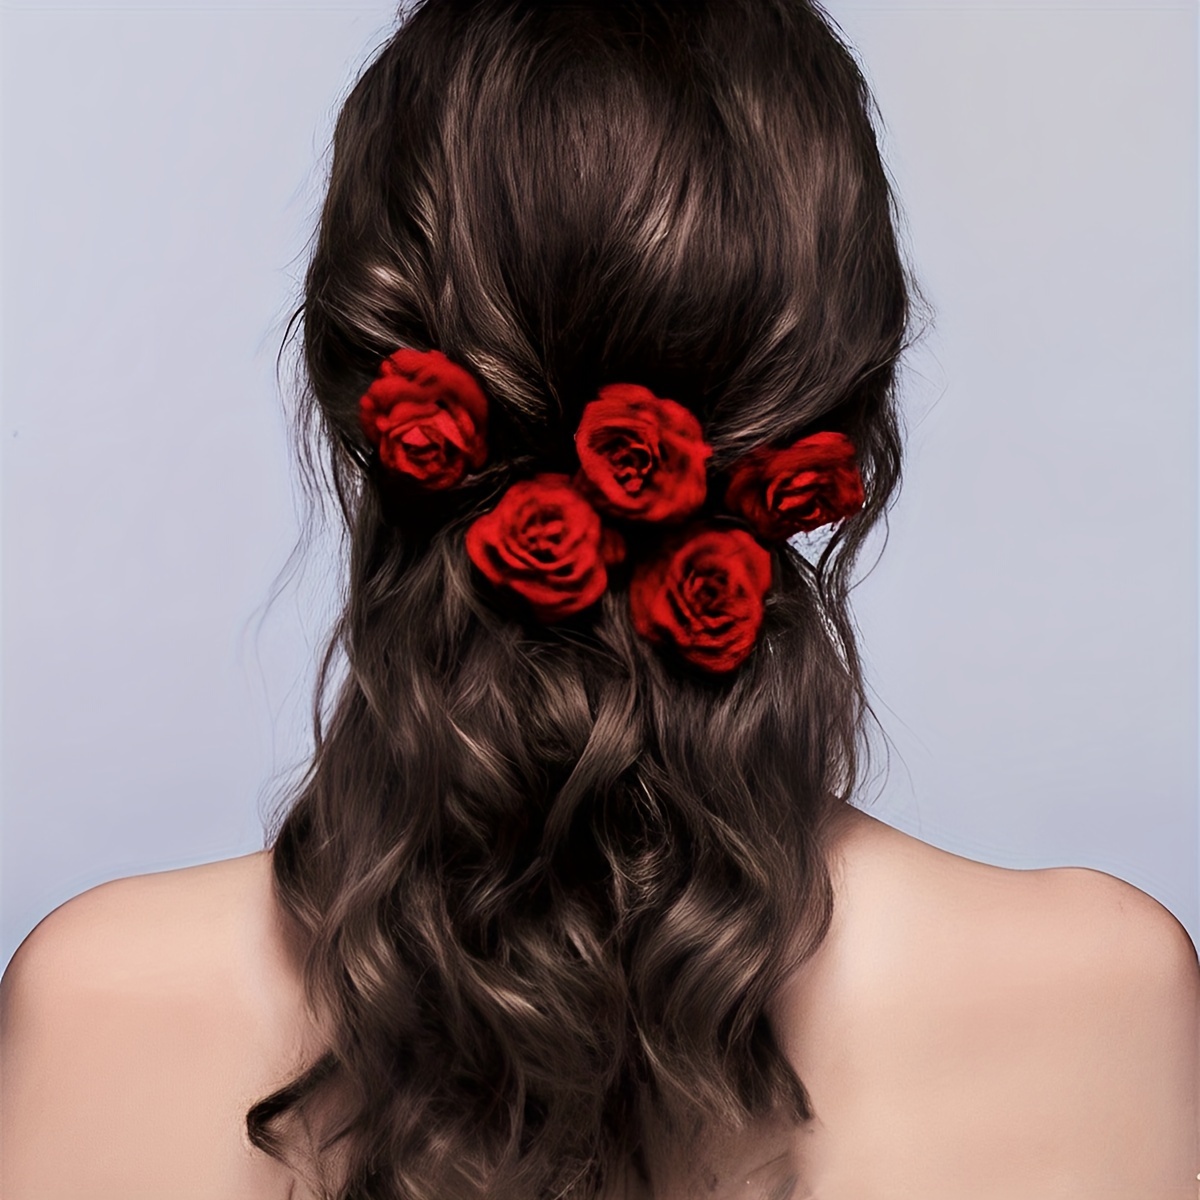 

5 Pcs Red Rose Flower Hair Clip Elegant Hairpin Vintage Boho Hair Accessories For Daily Party Wedding Decoration